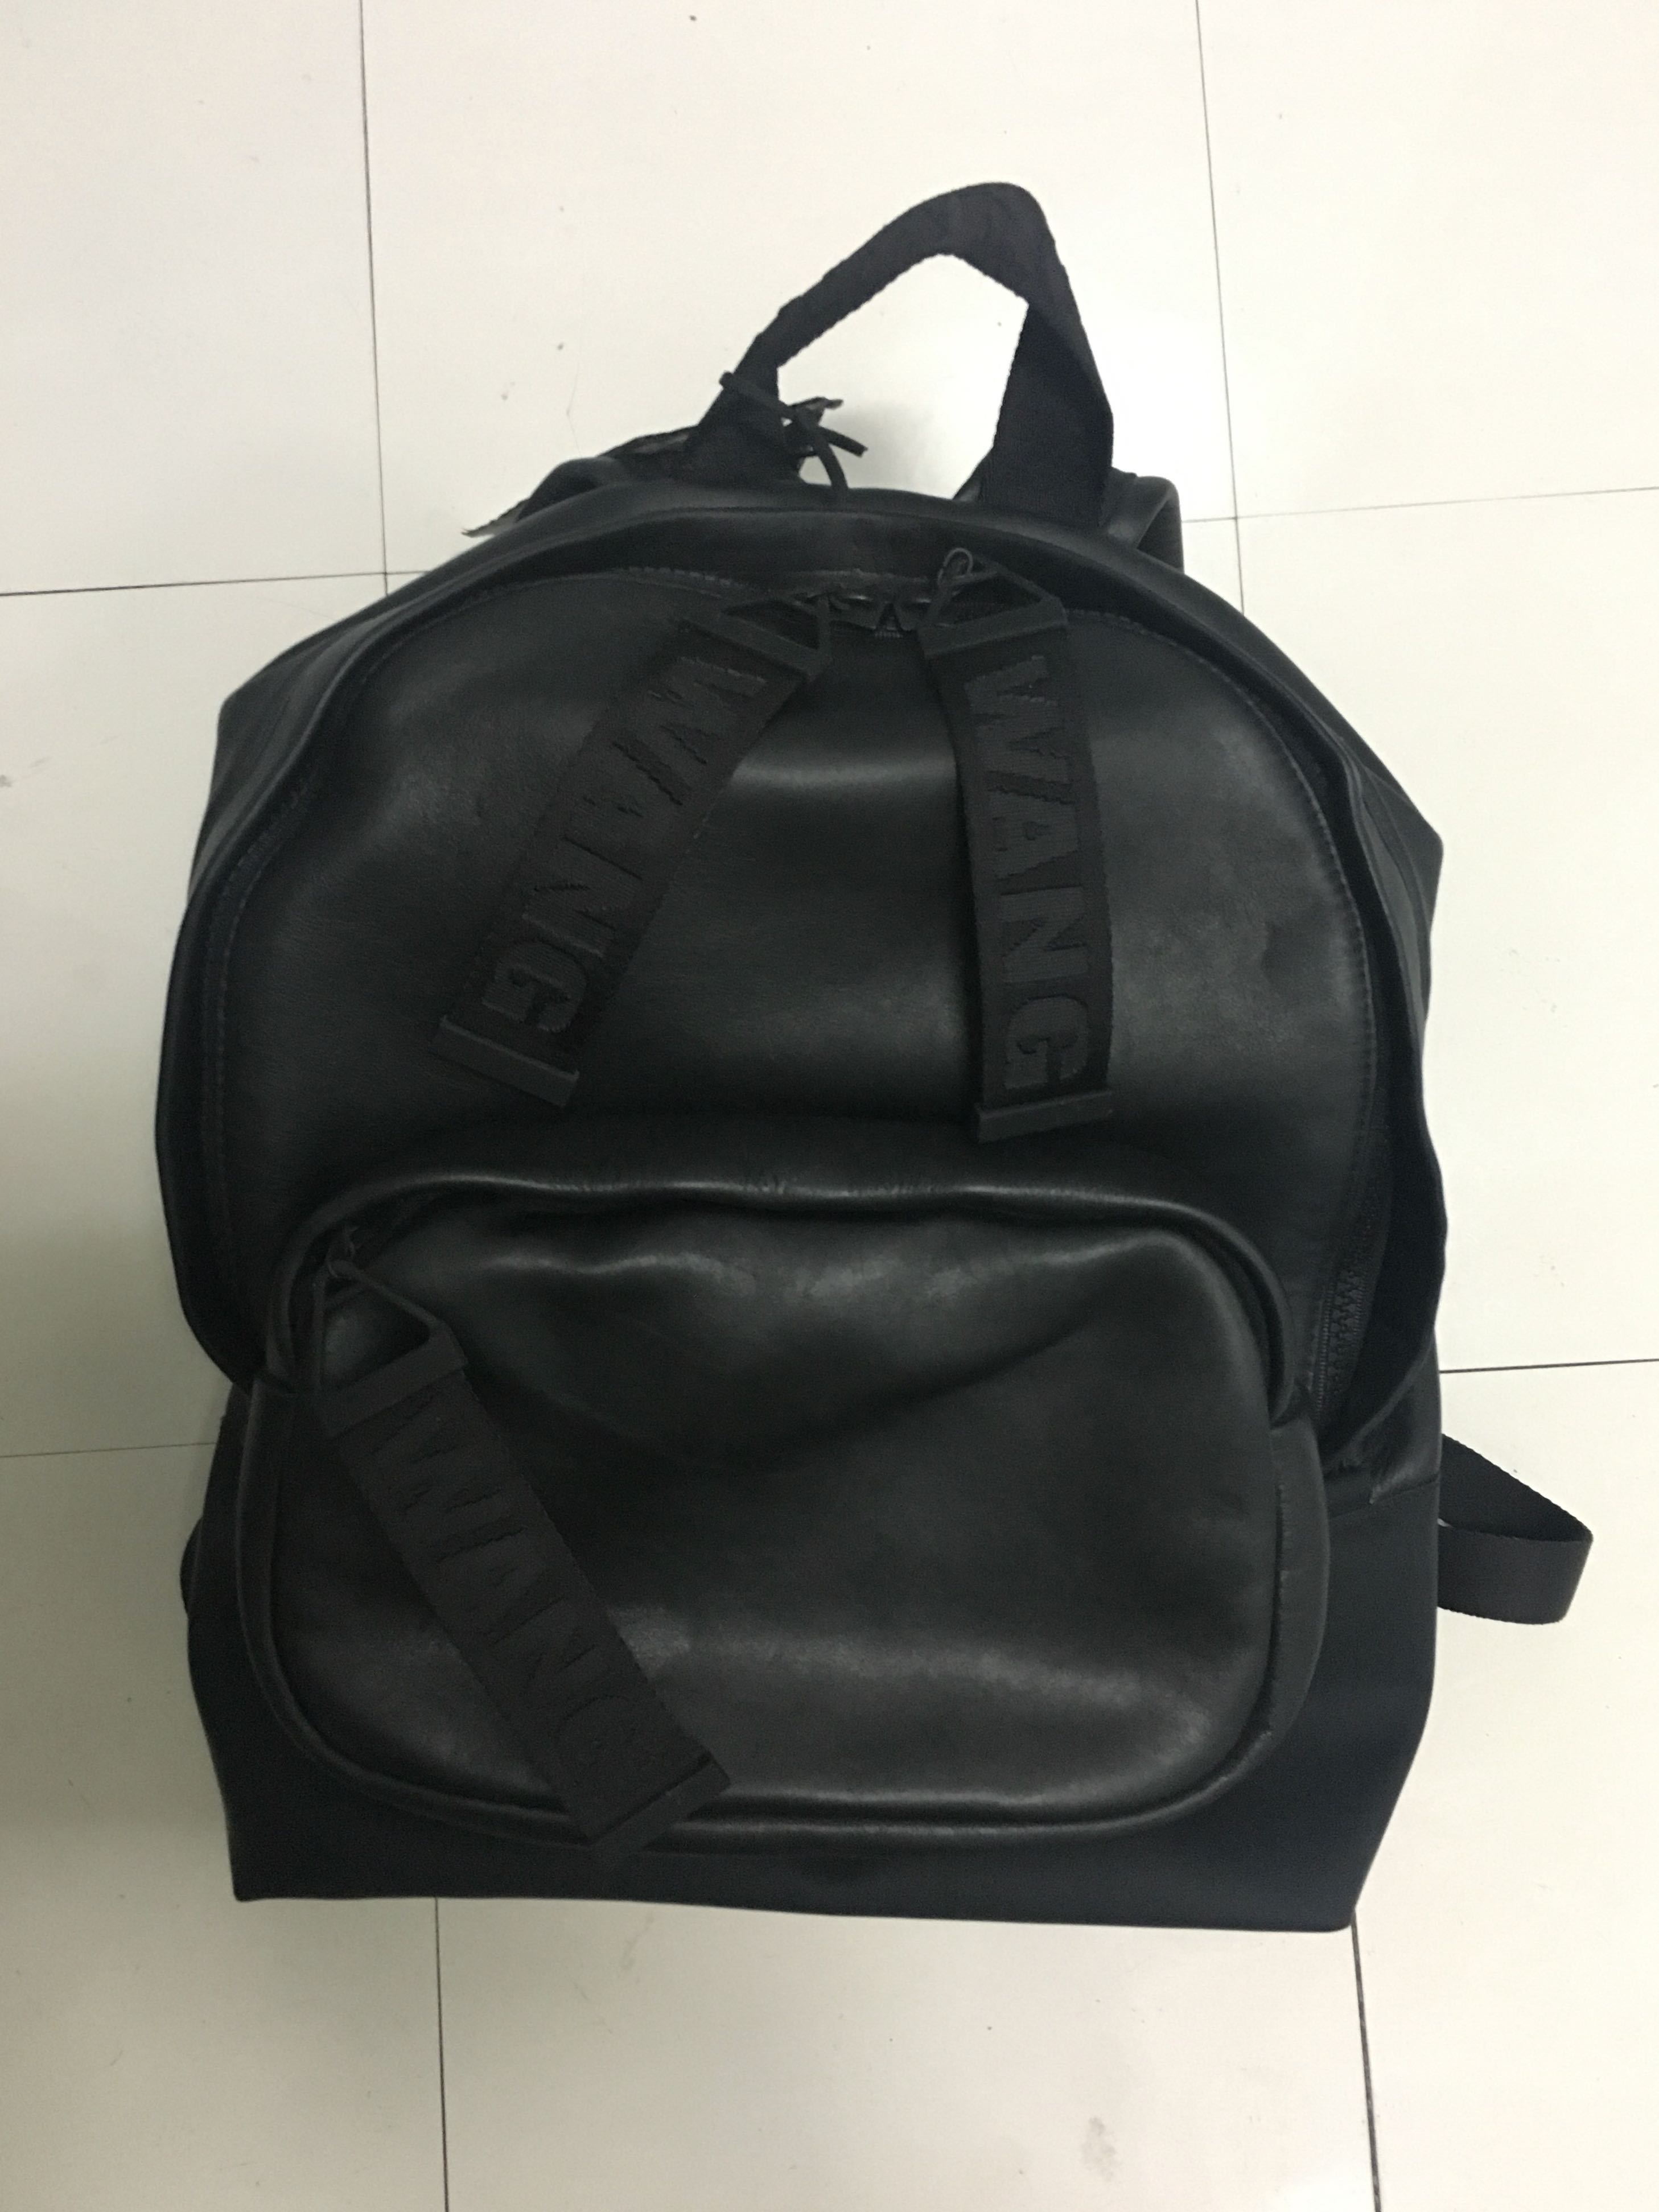 New Alexander Wang X H M Leather Backpack Men S Fashion Bags Backpacks On Carousell